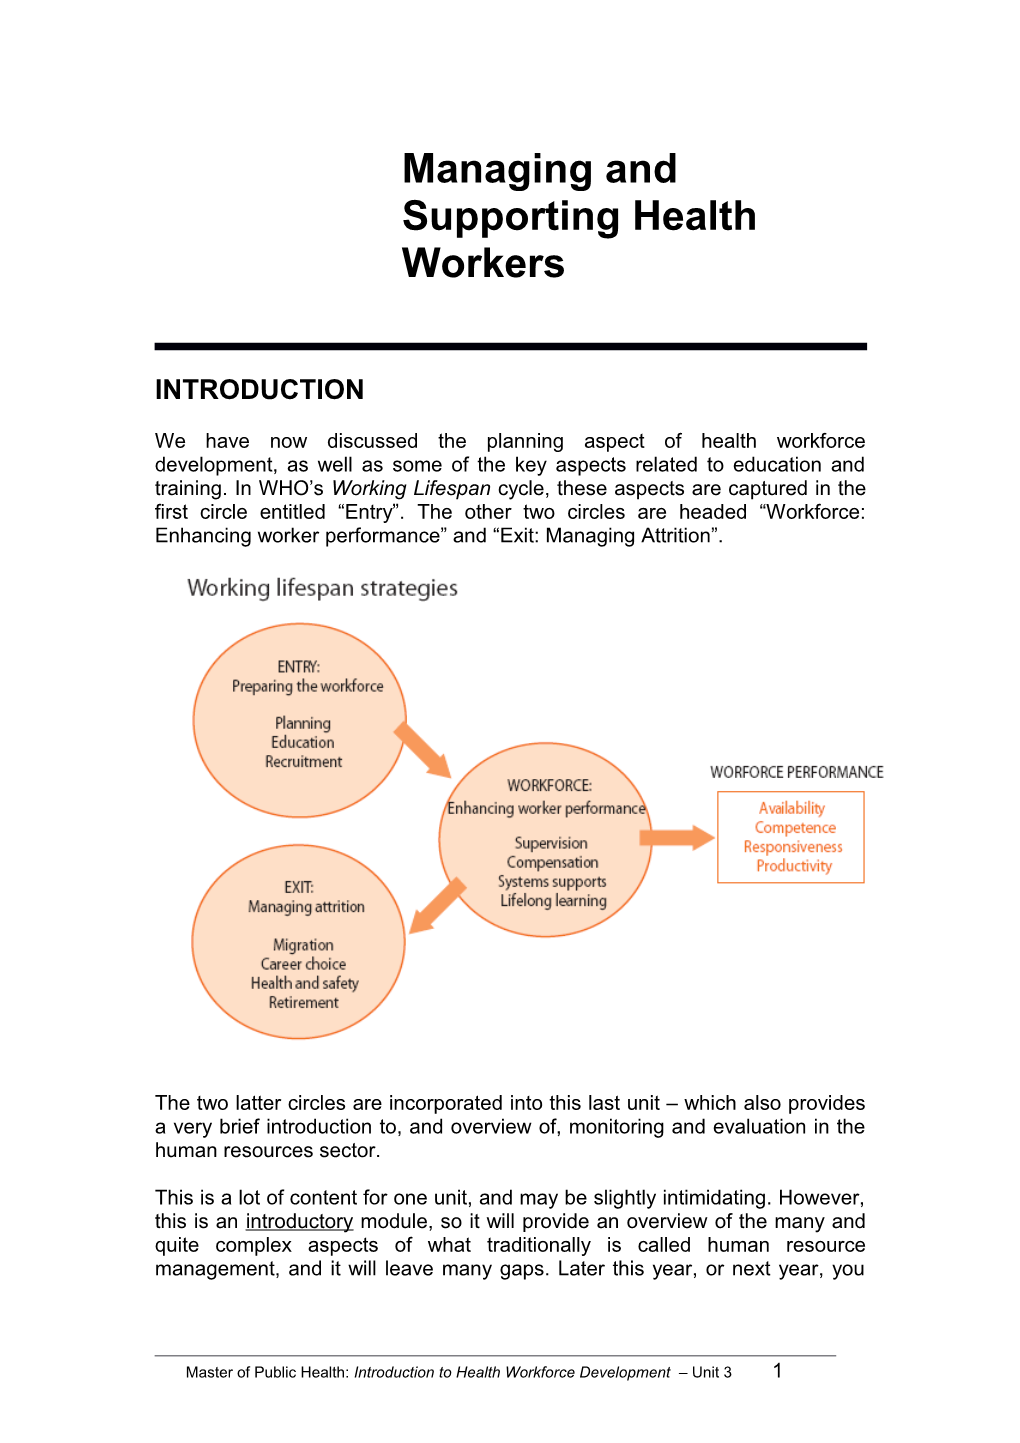 Master of Public Health: Introduction to Health Workforce Development Unit 31